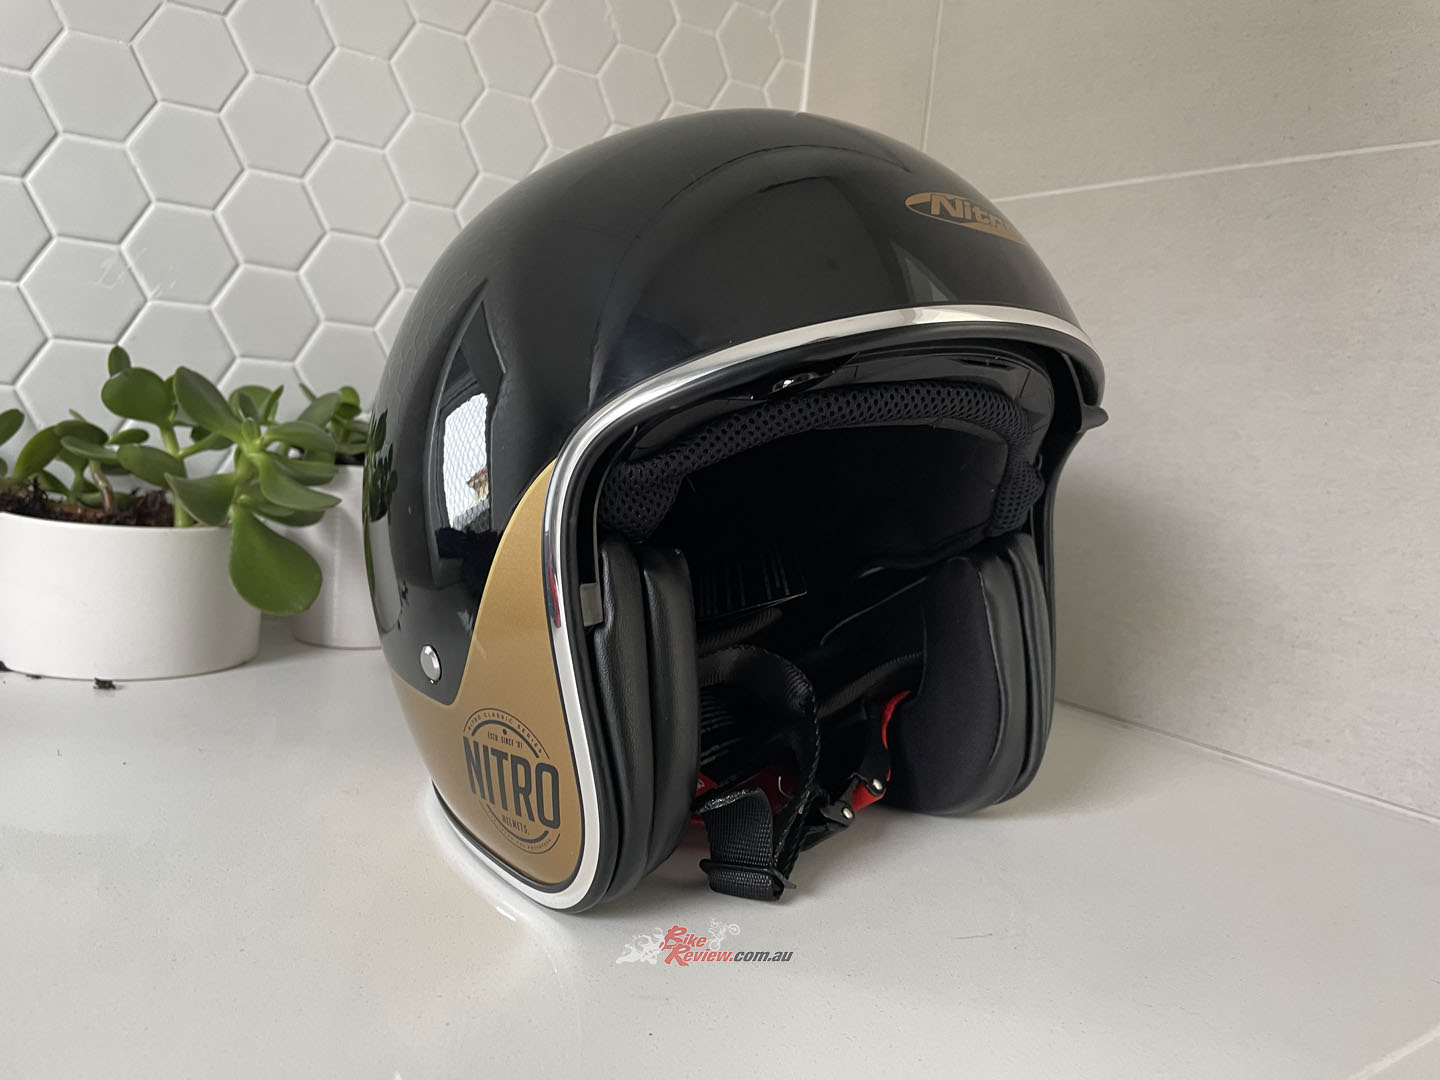 The Nitro X582 is my first brand new open-face helmet and I was honestly shocked at how they could make a lid like this at such a low price. Starting at $139, the X582 is peanuts for a branded lid.